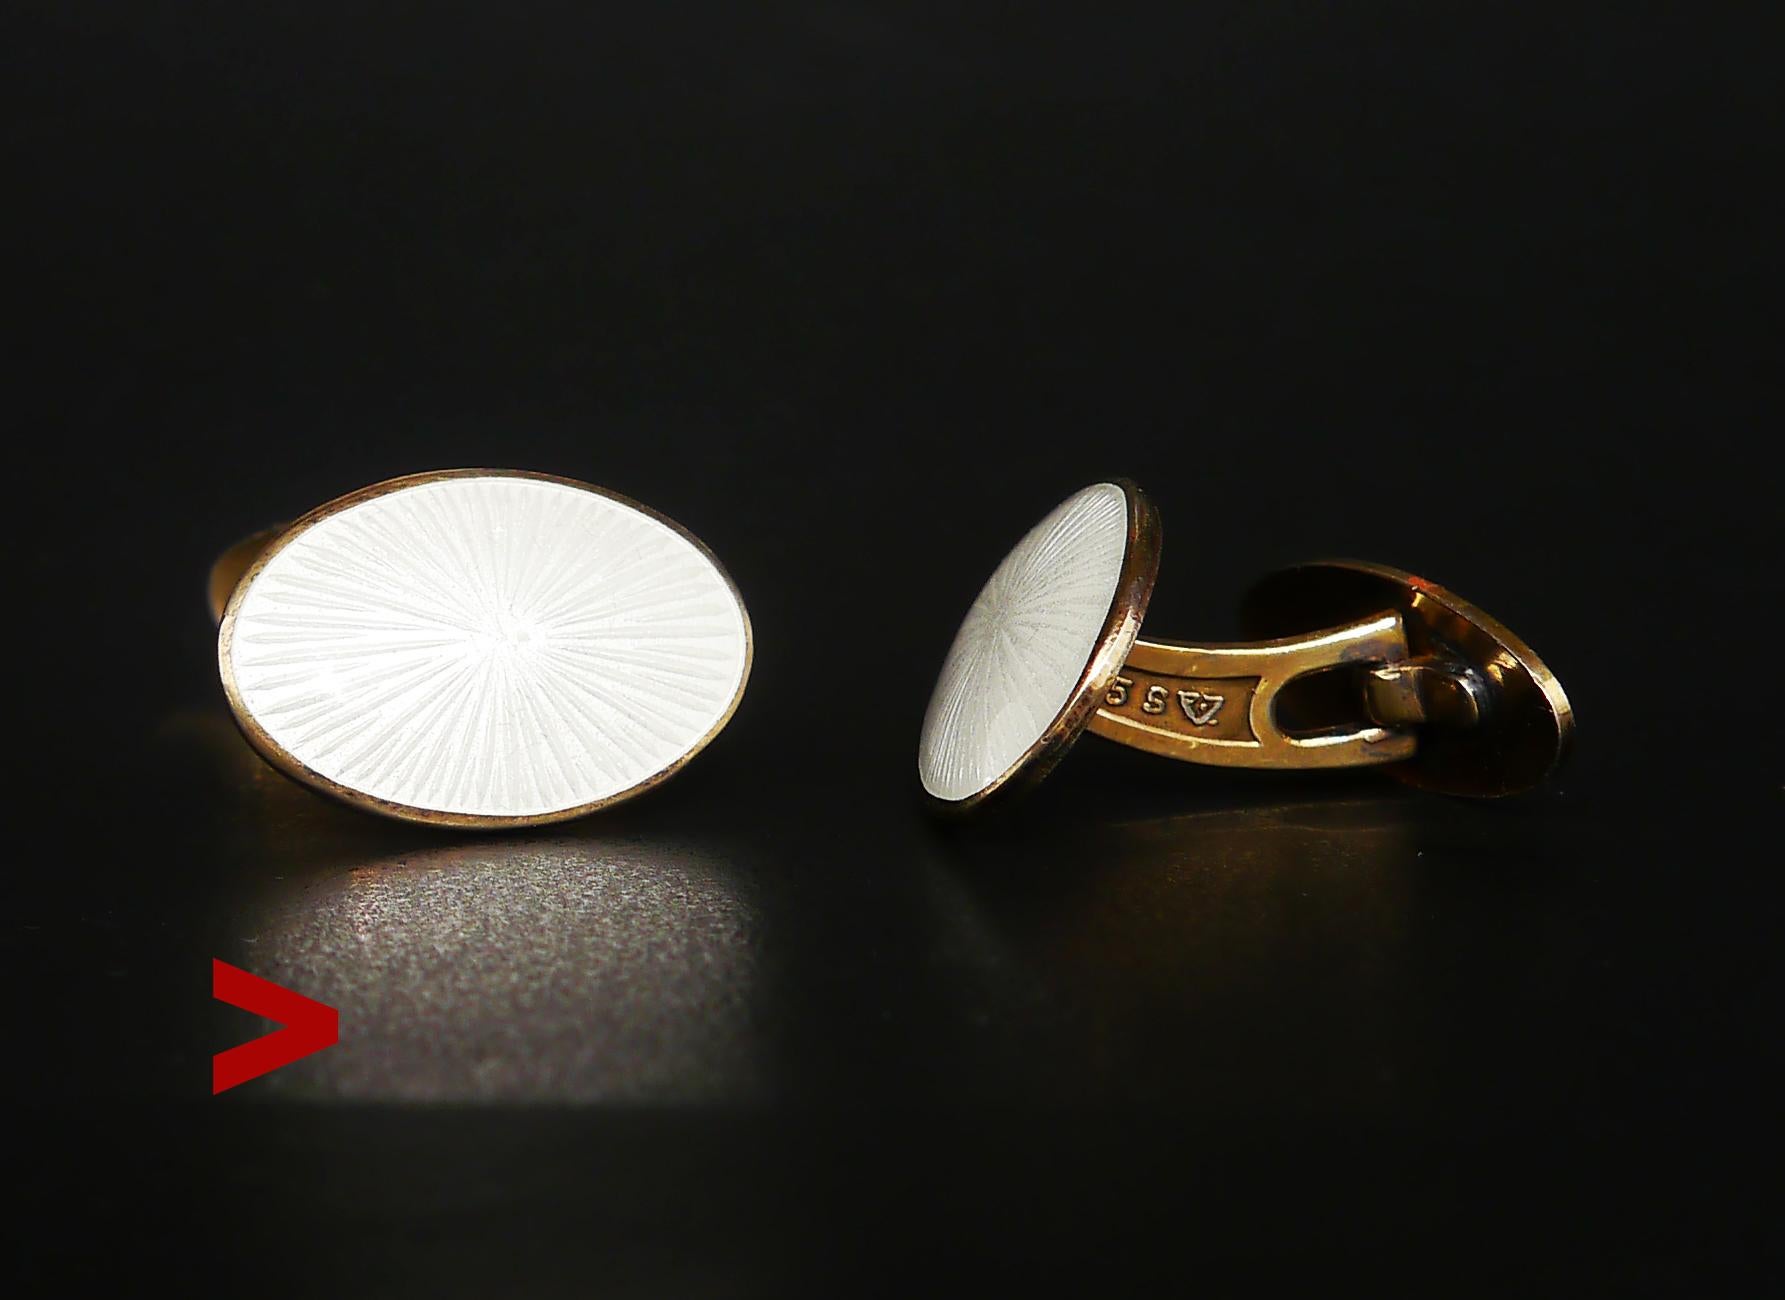 Norwegian cuff-links by J. Tostrup, Art Deco Style and Period.

Gilt Silver and enamel. Both sides show a Bursting Star pattern in White Guilloche Enamel that flashes in any light.

Hallmarked with J. Tostrup logo, 925S, Norway Sterling.

Period of